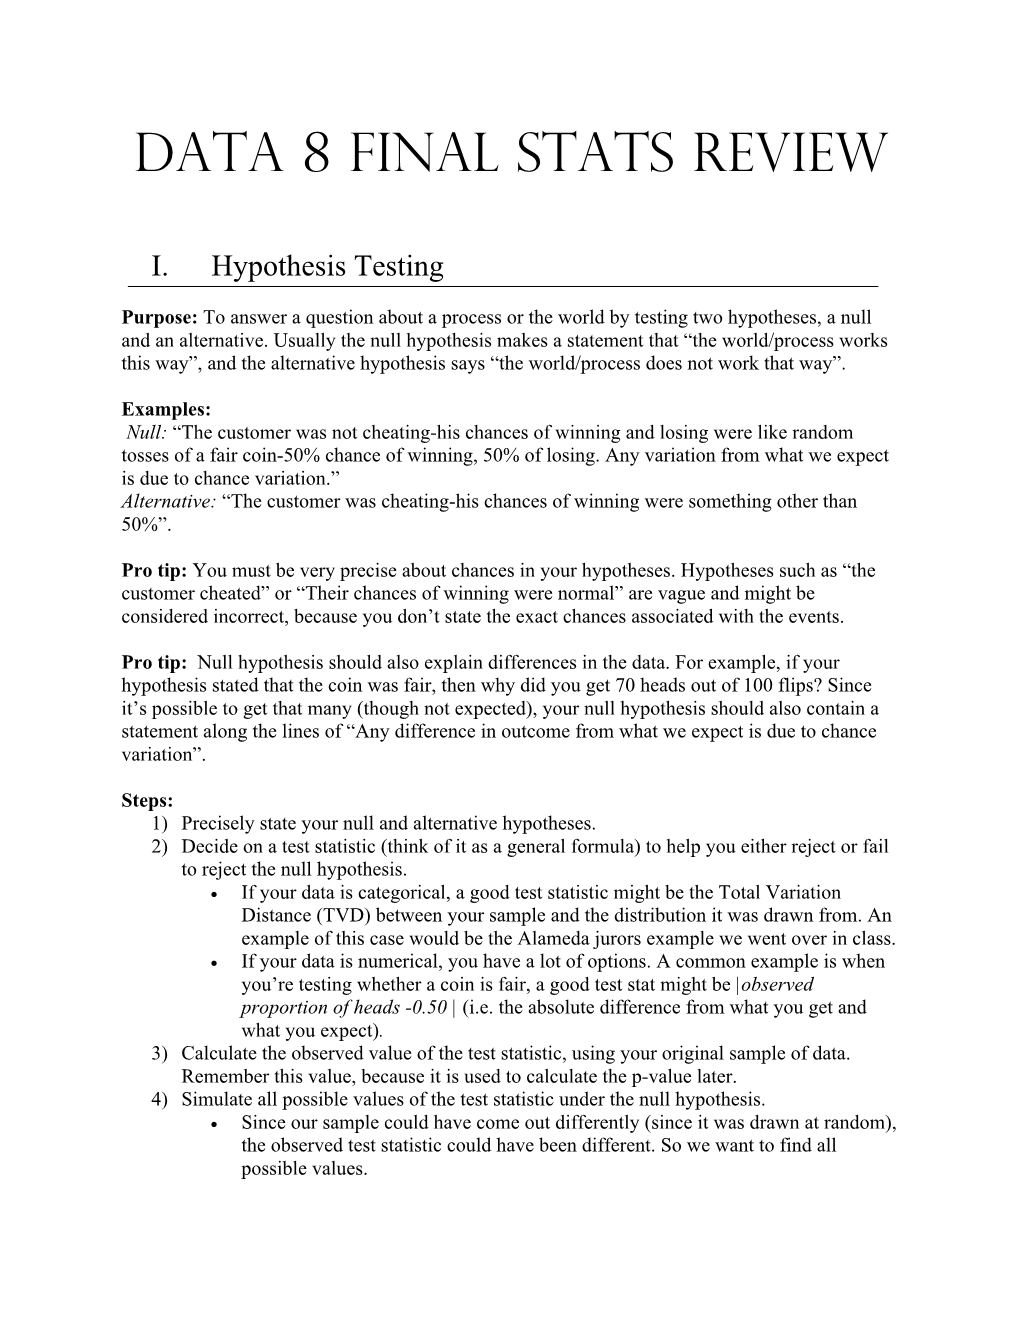 Data 8 Final Stats Review